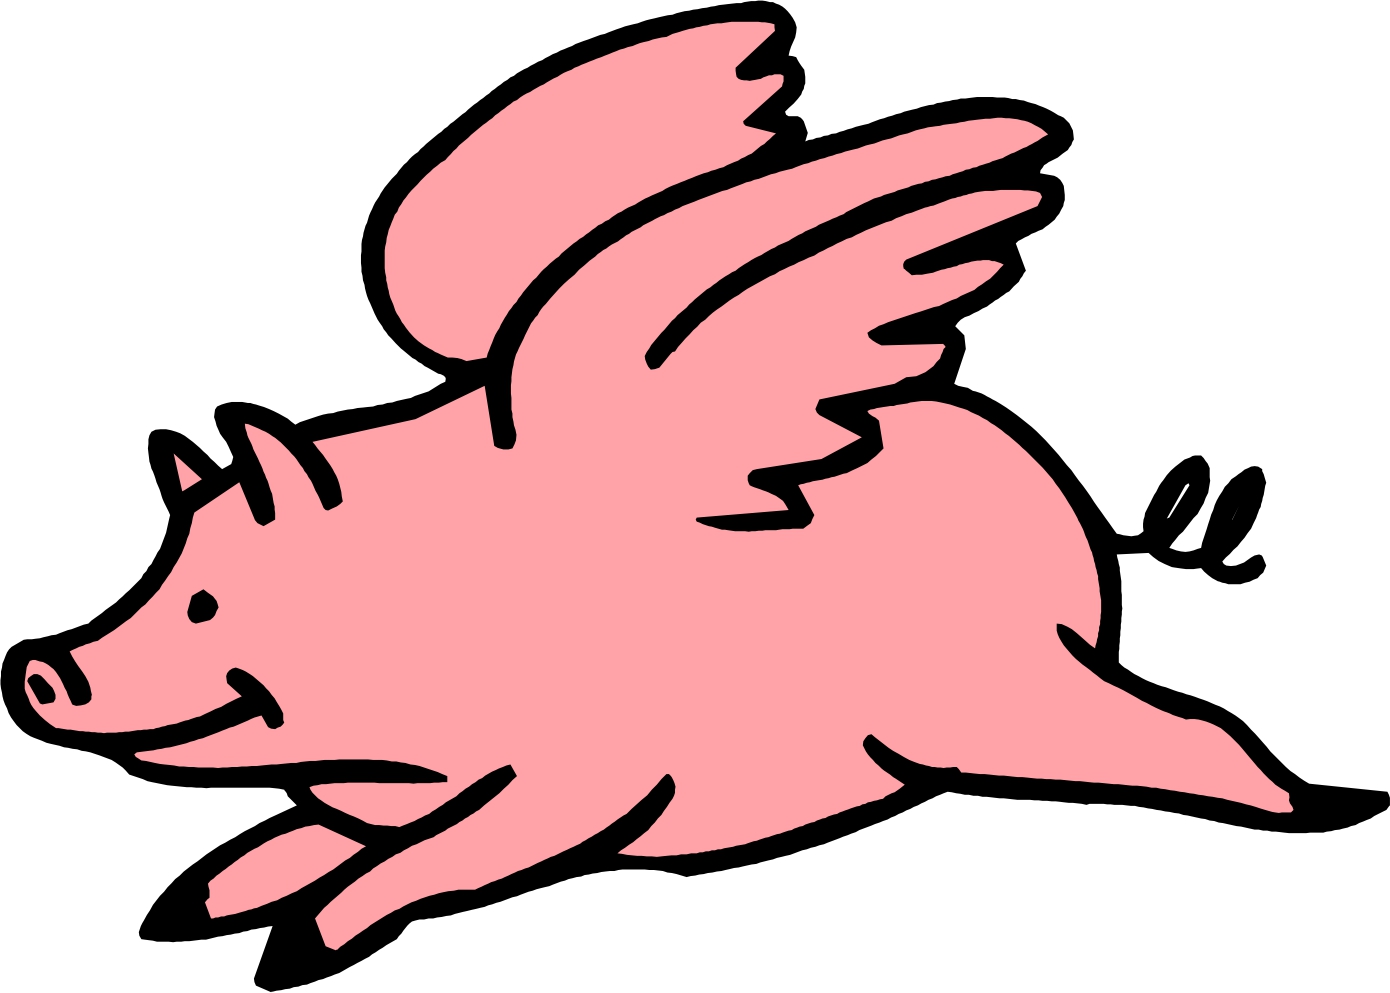 clipart of a pig - photo #50